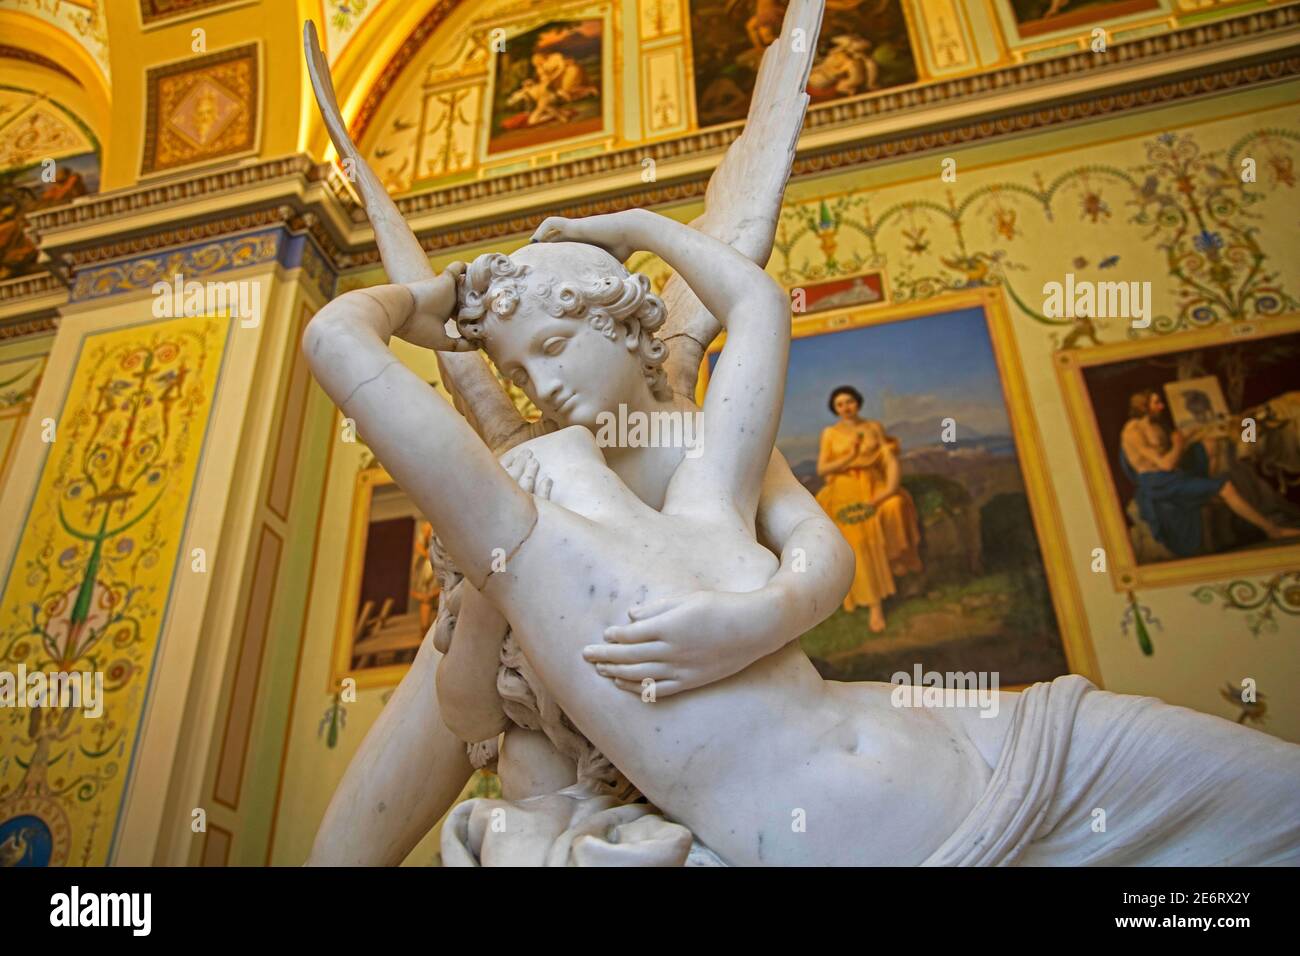 Neoclassical sculpture in the Gallery of the History of Ancient Painting in the Winter Palace / State Hermitage Museum in Saint Petersburg, Russia Stock Photo